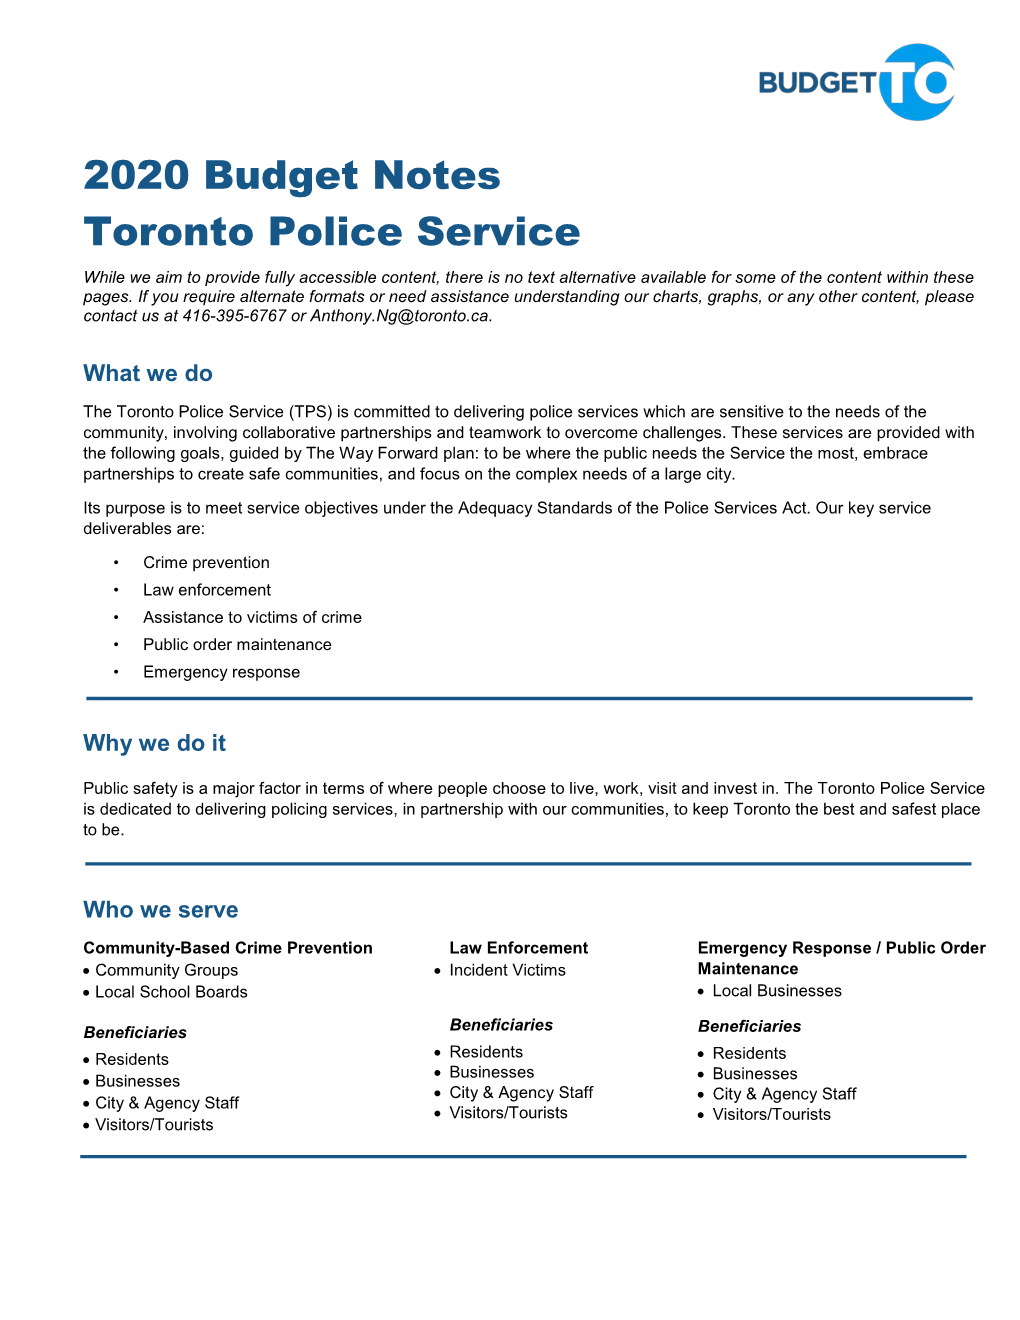 2020 Staff Recommended Capital and Operating Budget Notes – Toronto Police Services